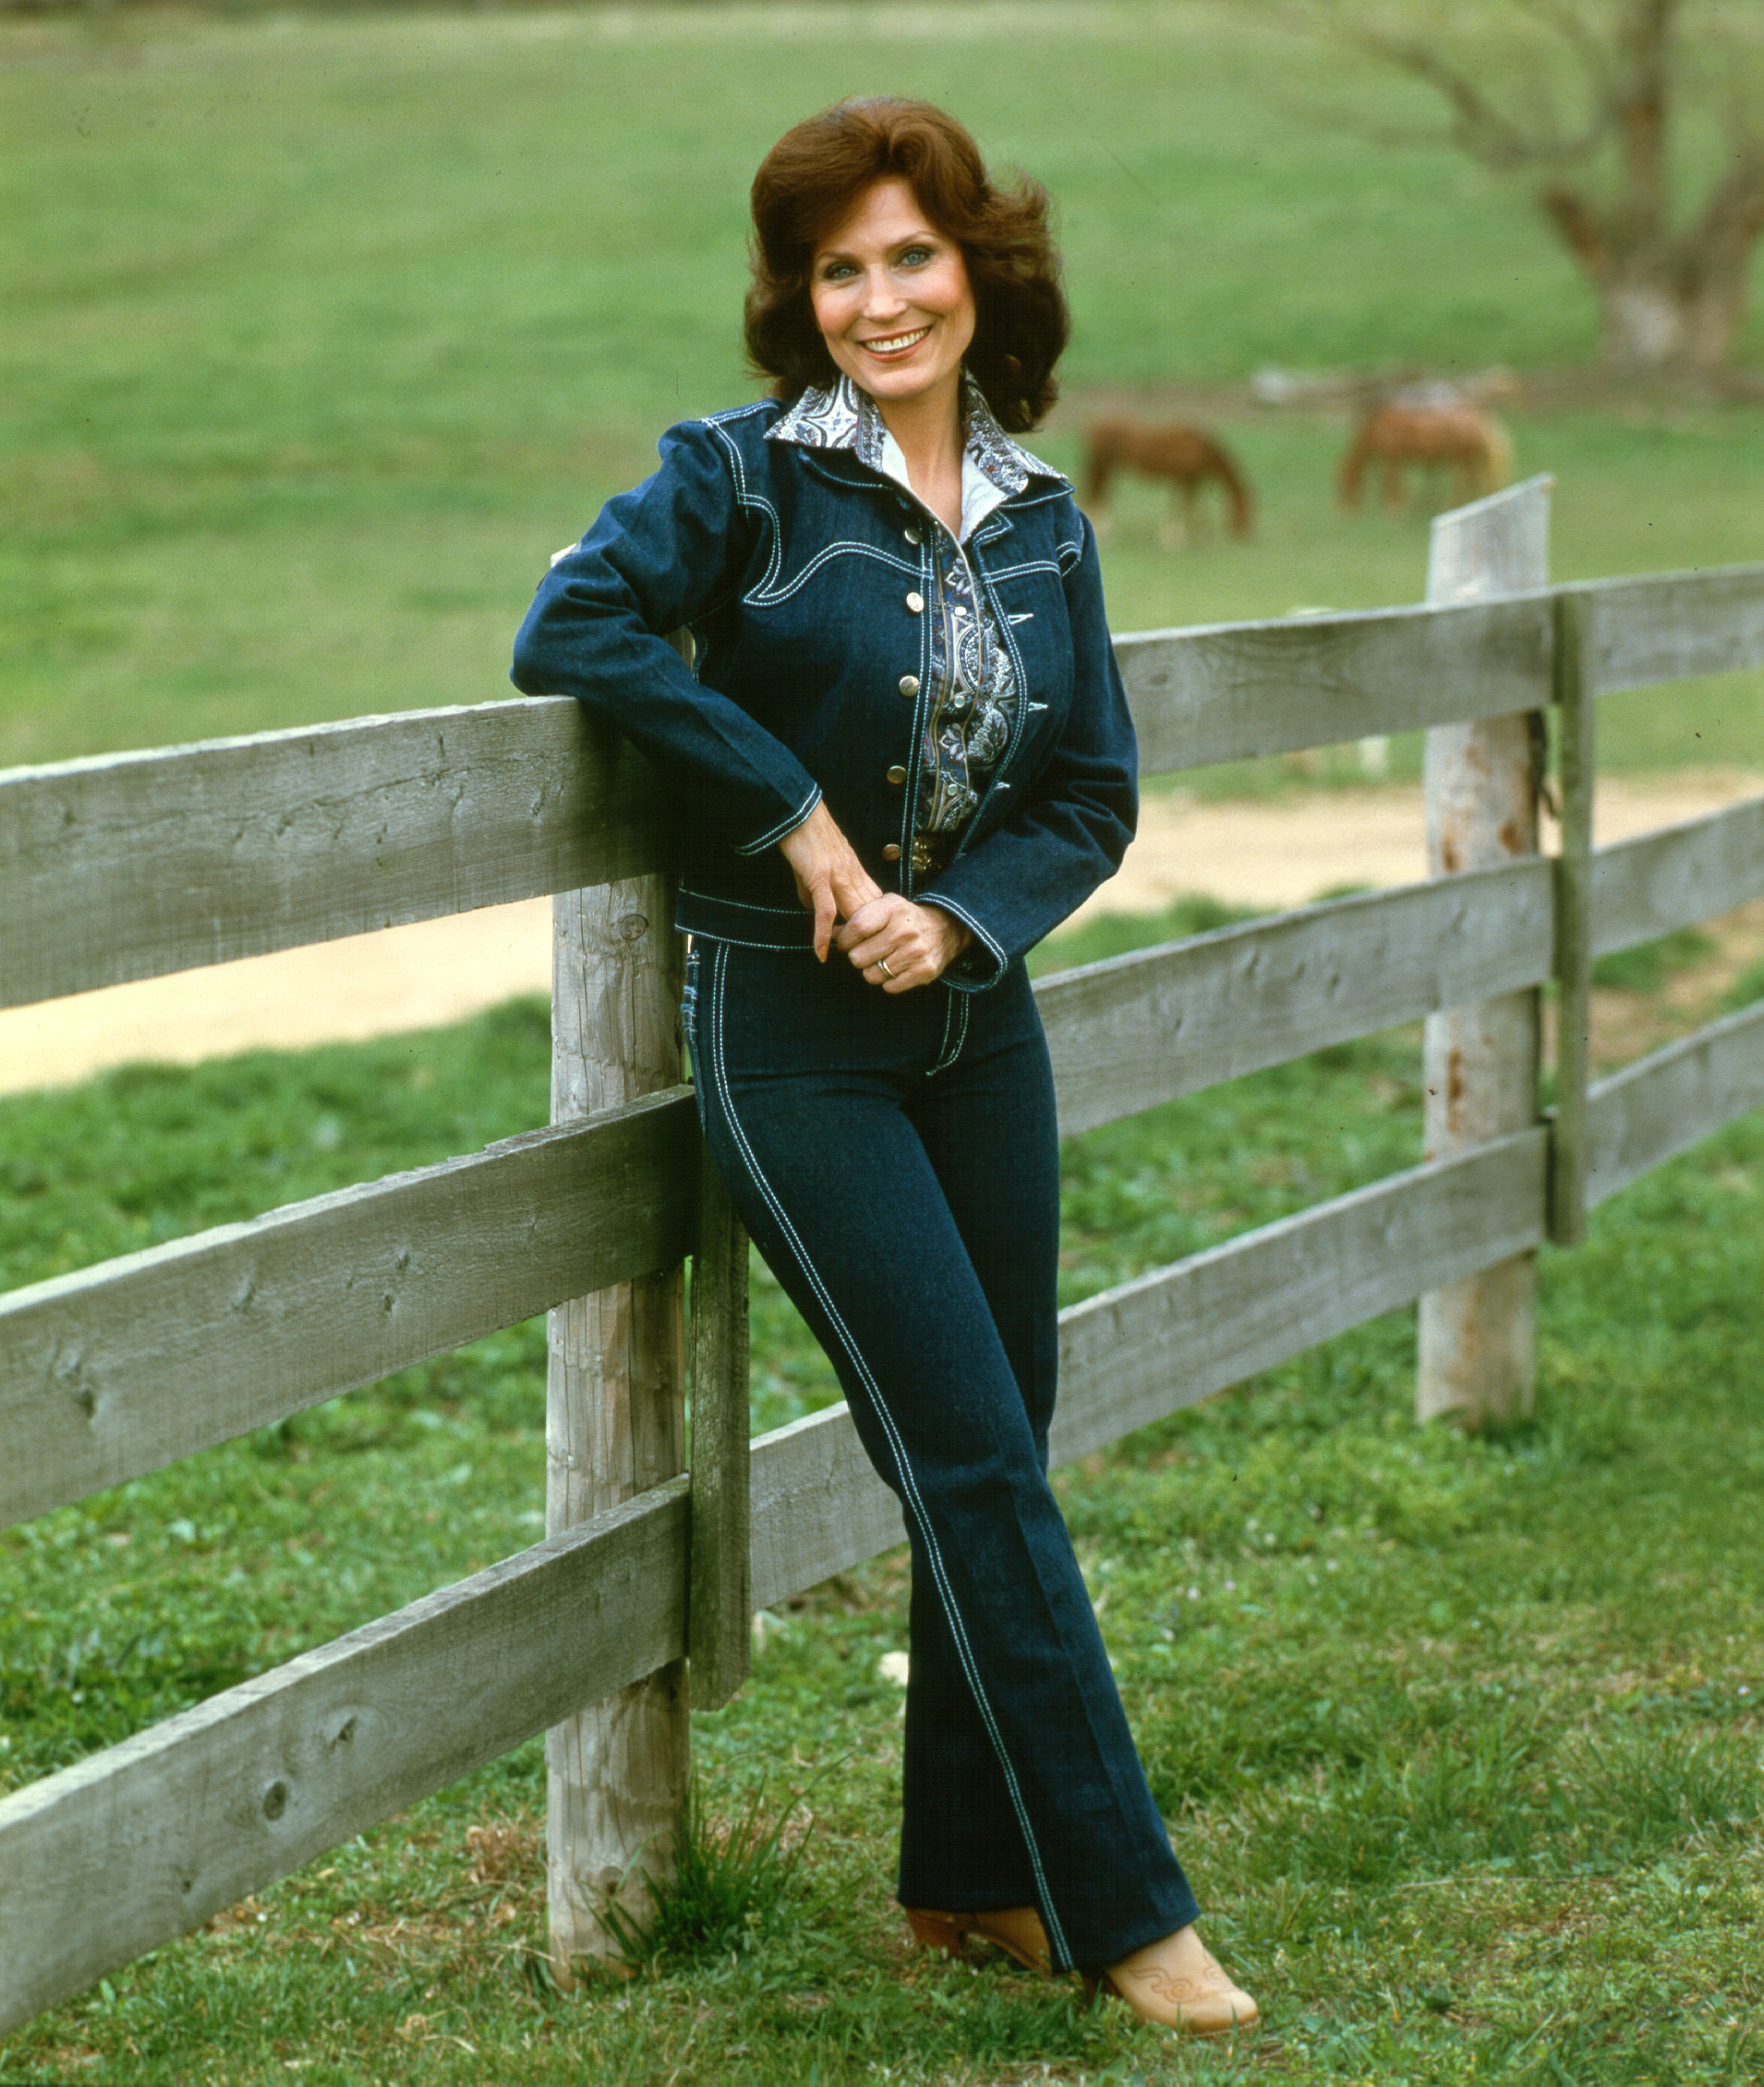 Loretta Lynn photographed in 1976 | Source: Getty Images